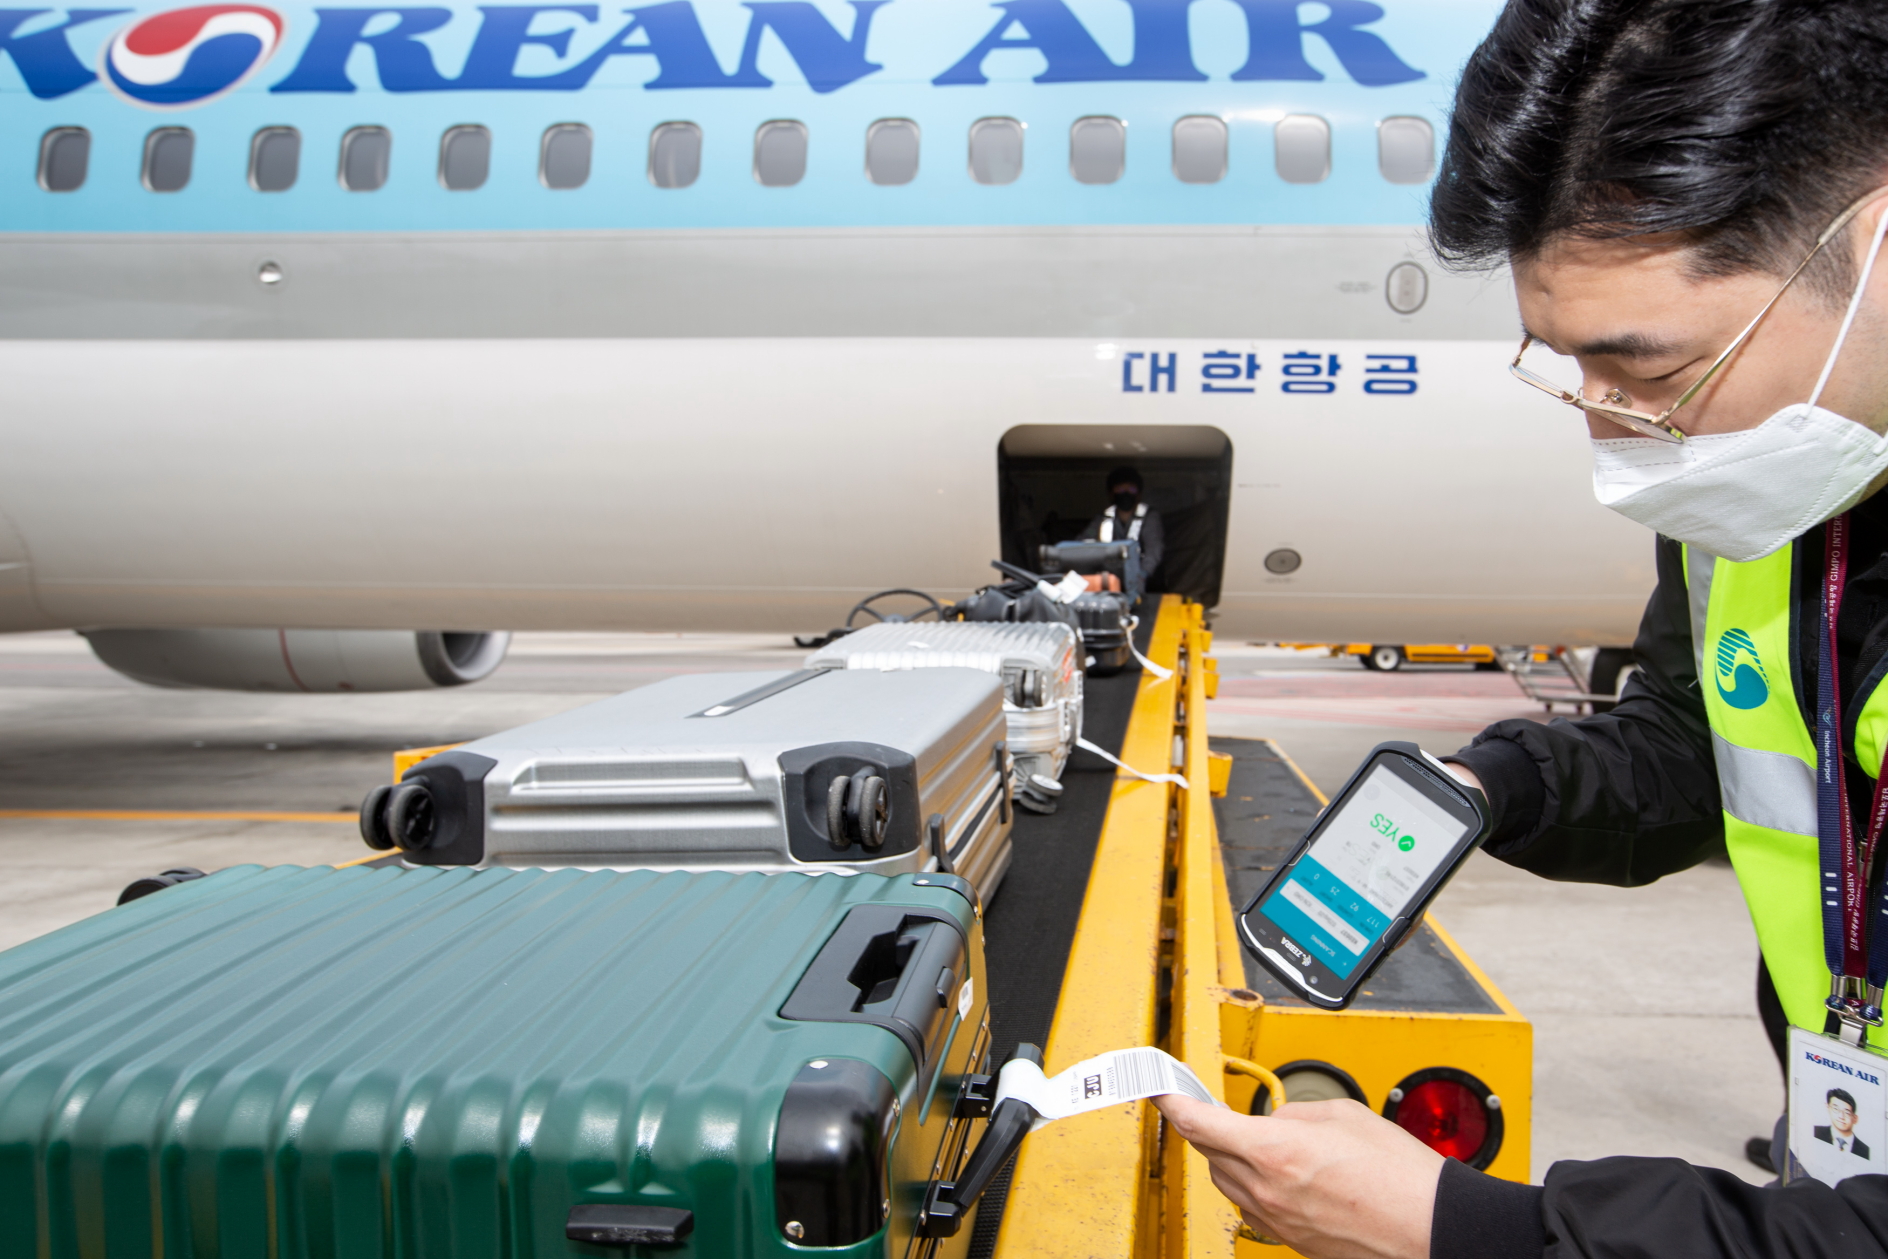 Korean Air will expand its baggage notification service to all international and domestic flights, starting 1 May 2021. Click to enlarge.